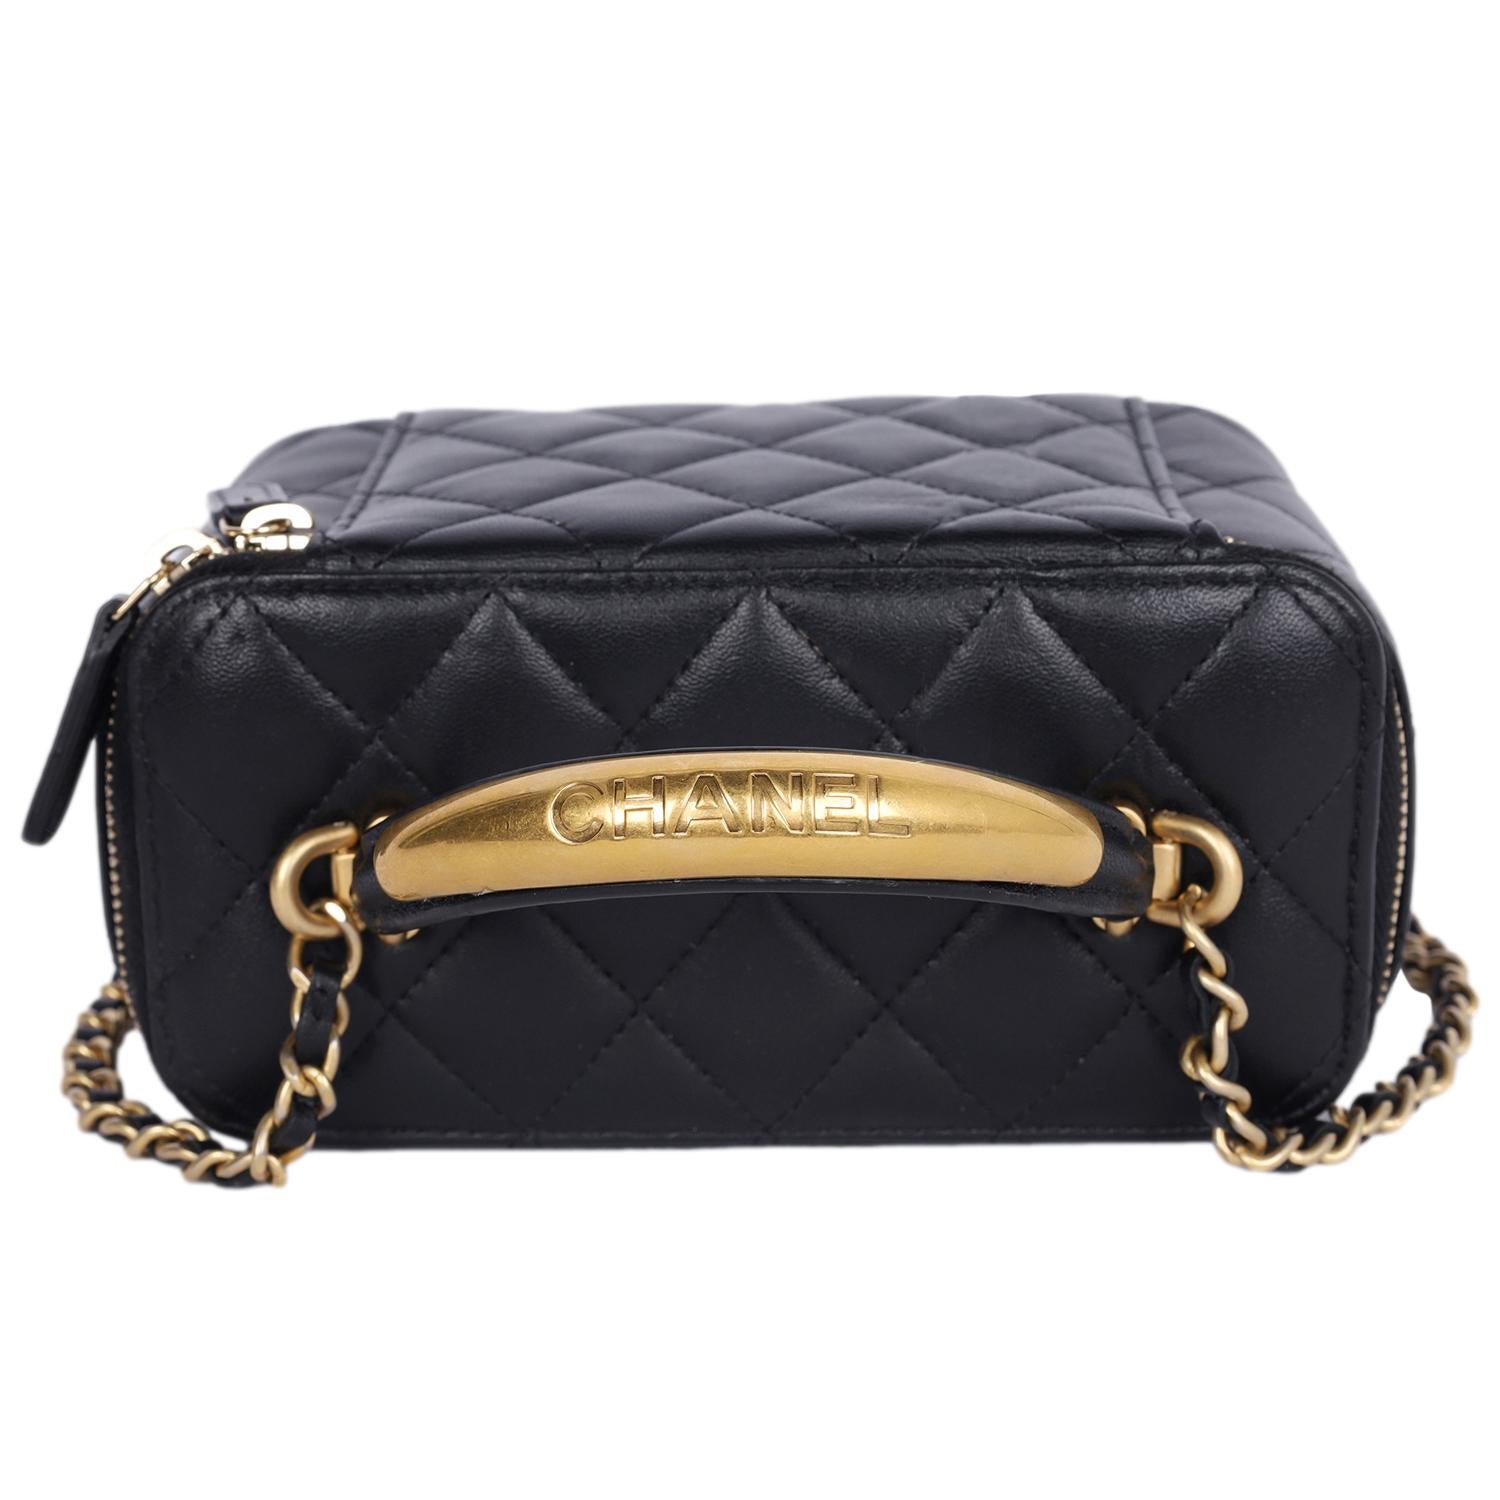 Chanel Lambskin Quilted Small Top Handle Vanity Case Black Crossbody Bag 8